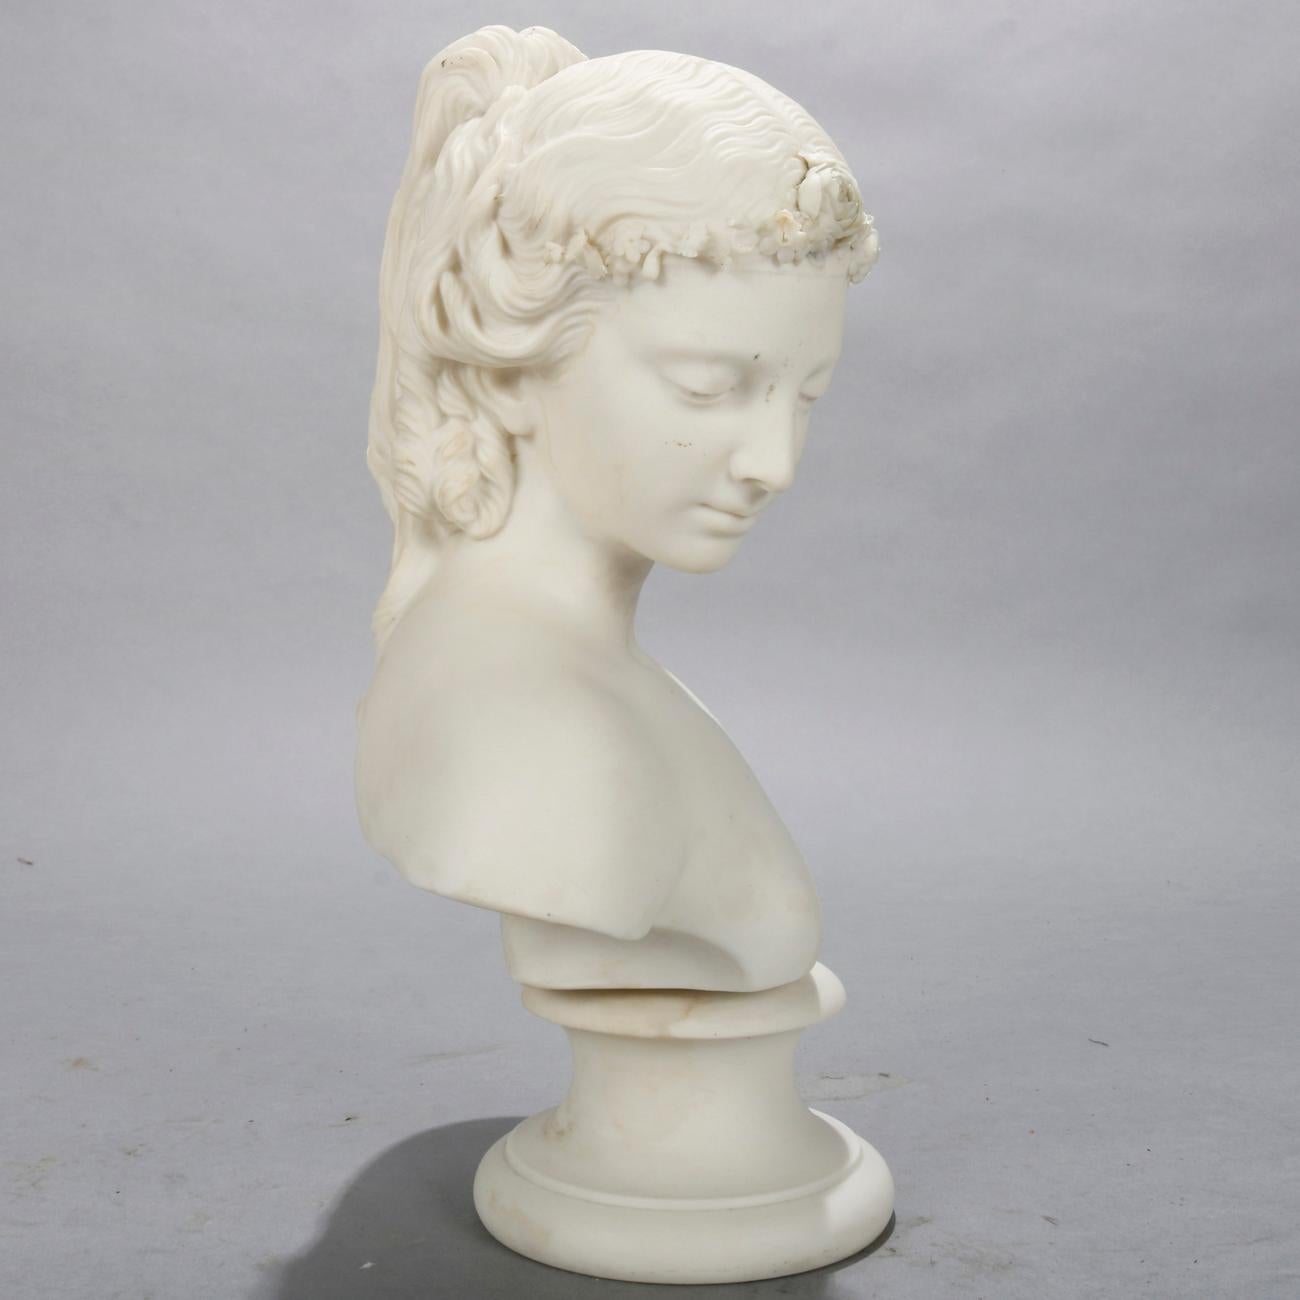 English Antique Classical Grecian Parian Portrait Bust of a Woman by Copeland circa 1890